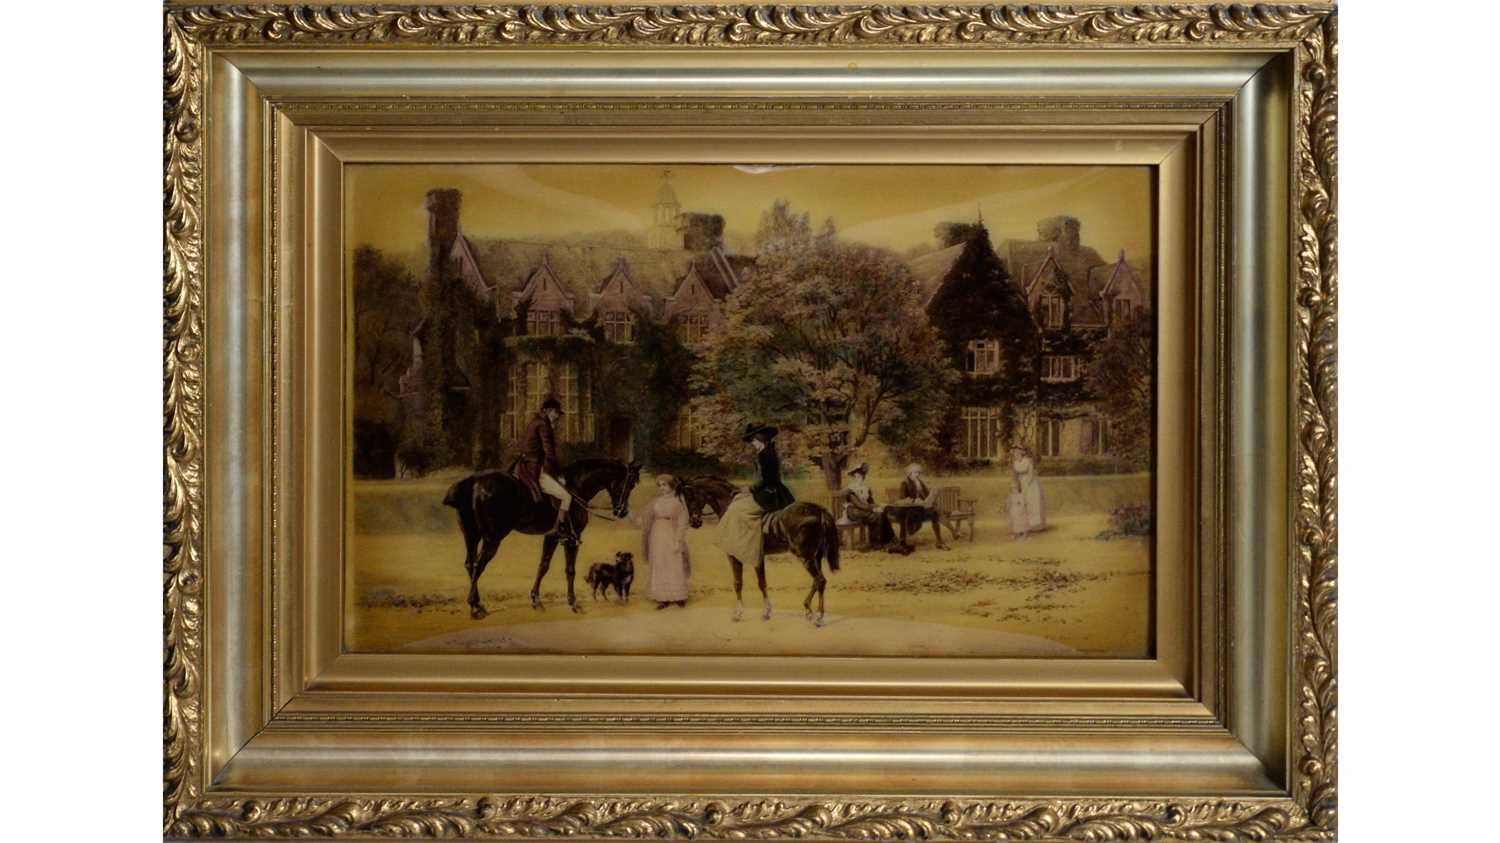 Lot 2 - After Arthur Langley Vernon - The Riders Return | crystoleum